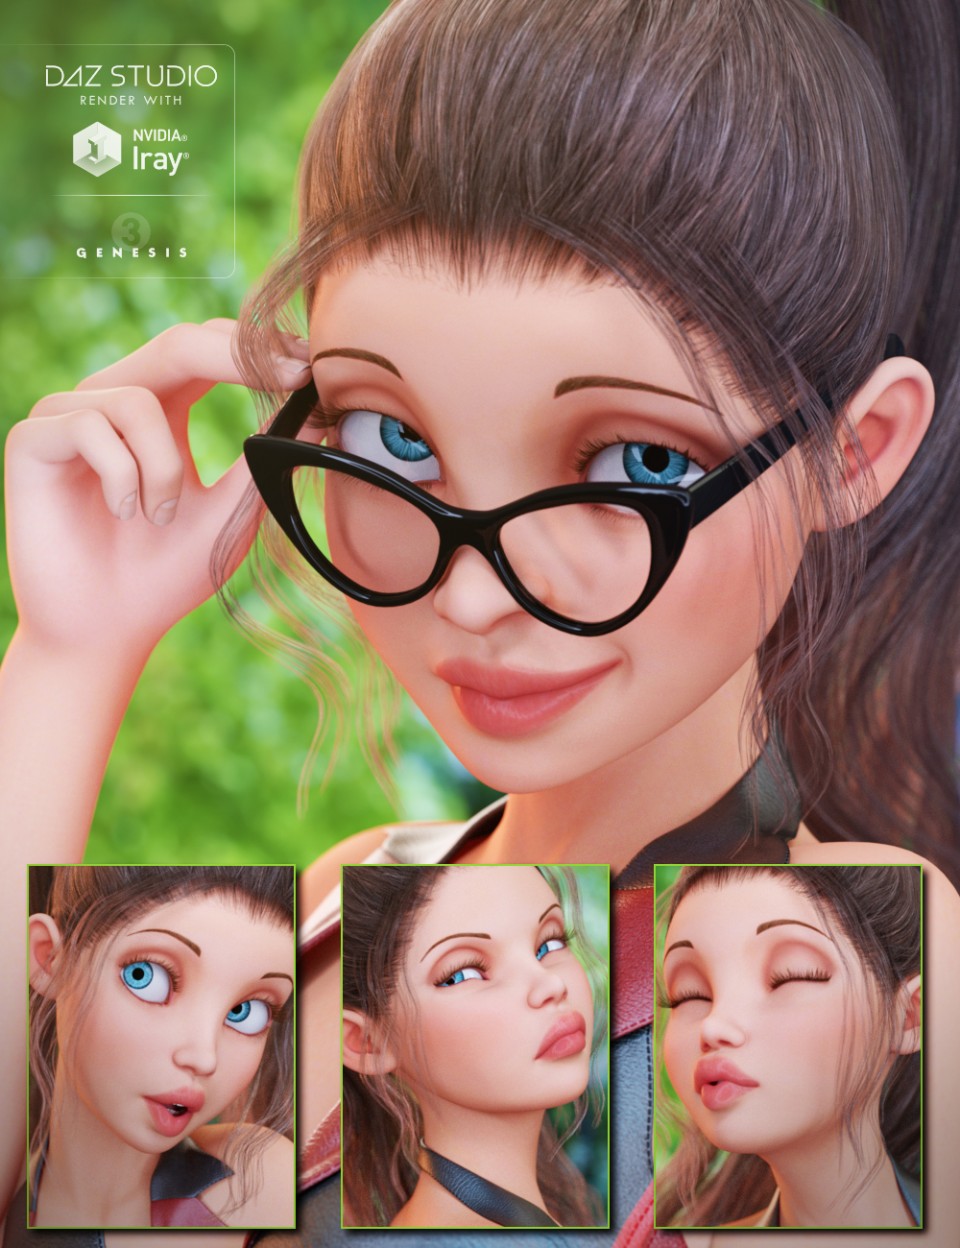 Capsces Tooned Expressions for The Girl 7_DAZ3DDL